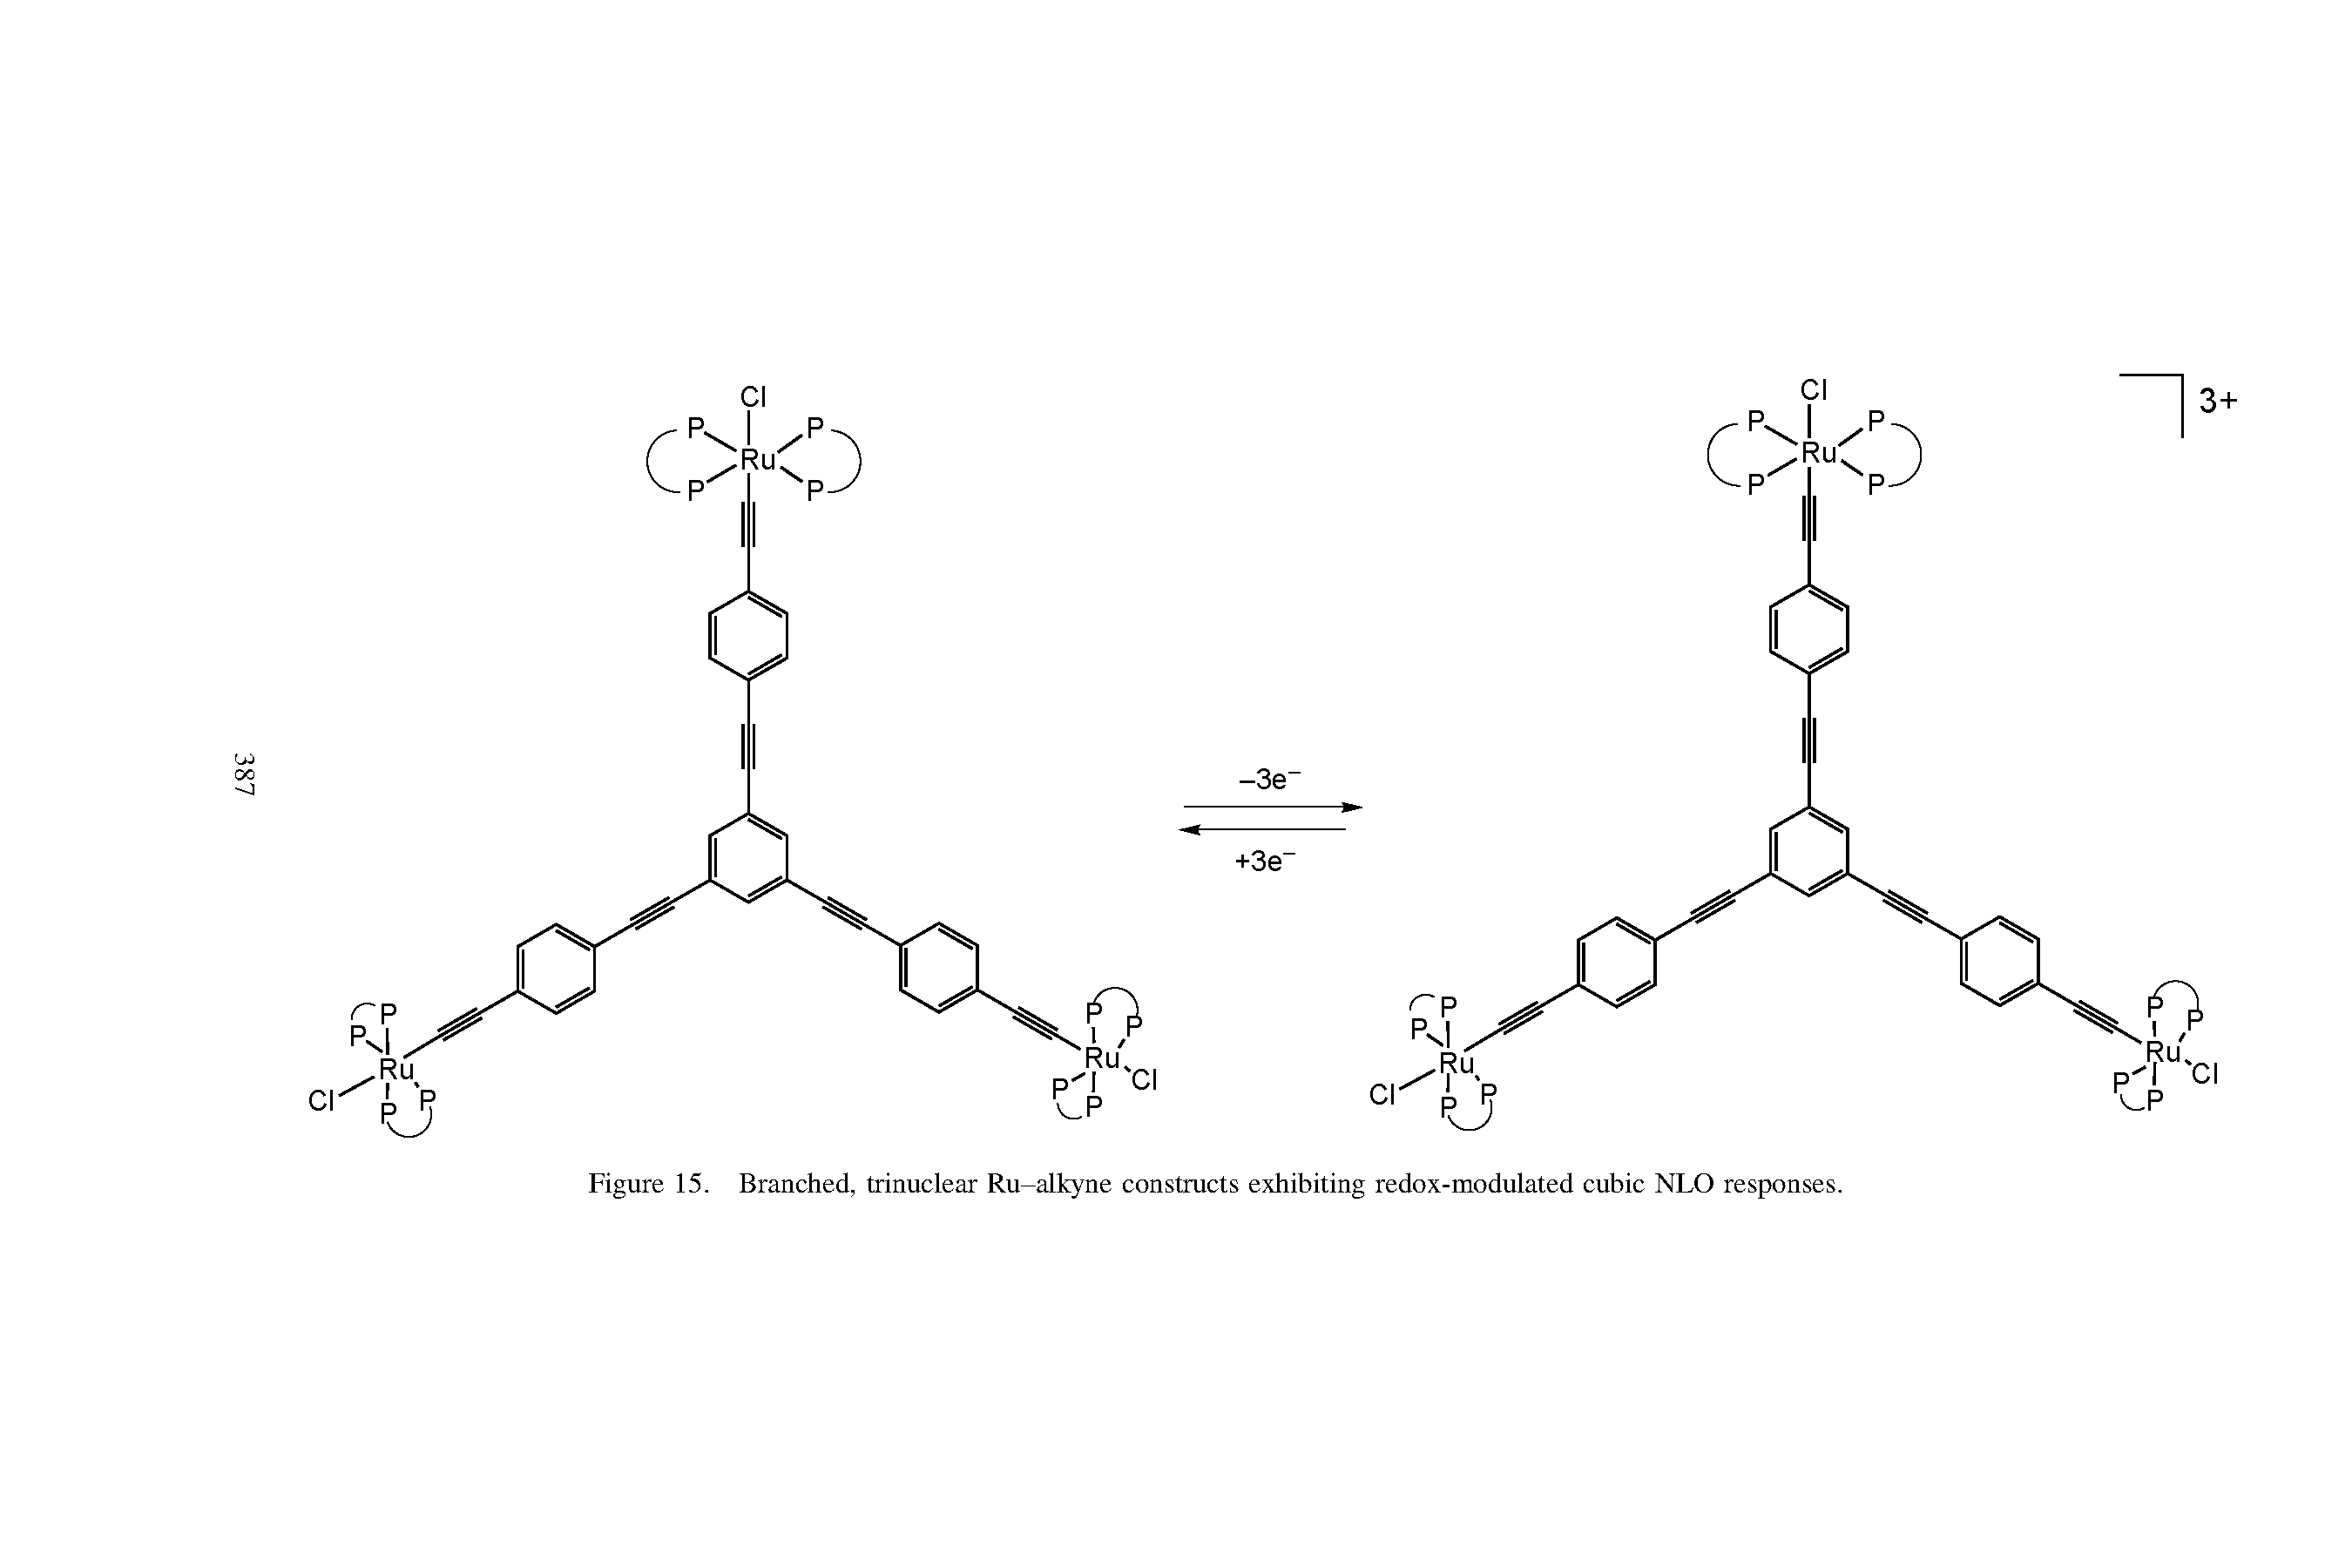 Figure 15. Branched, trinuclear Ru-alkyne constructs exhibiting redox-modulated cubic NLO responses.